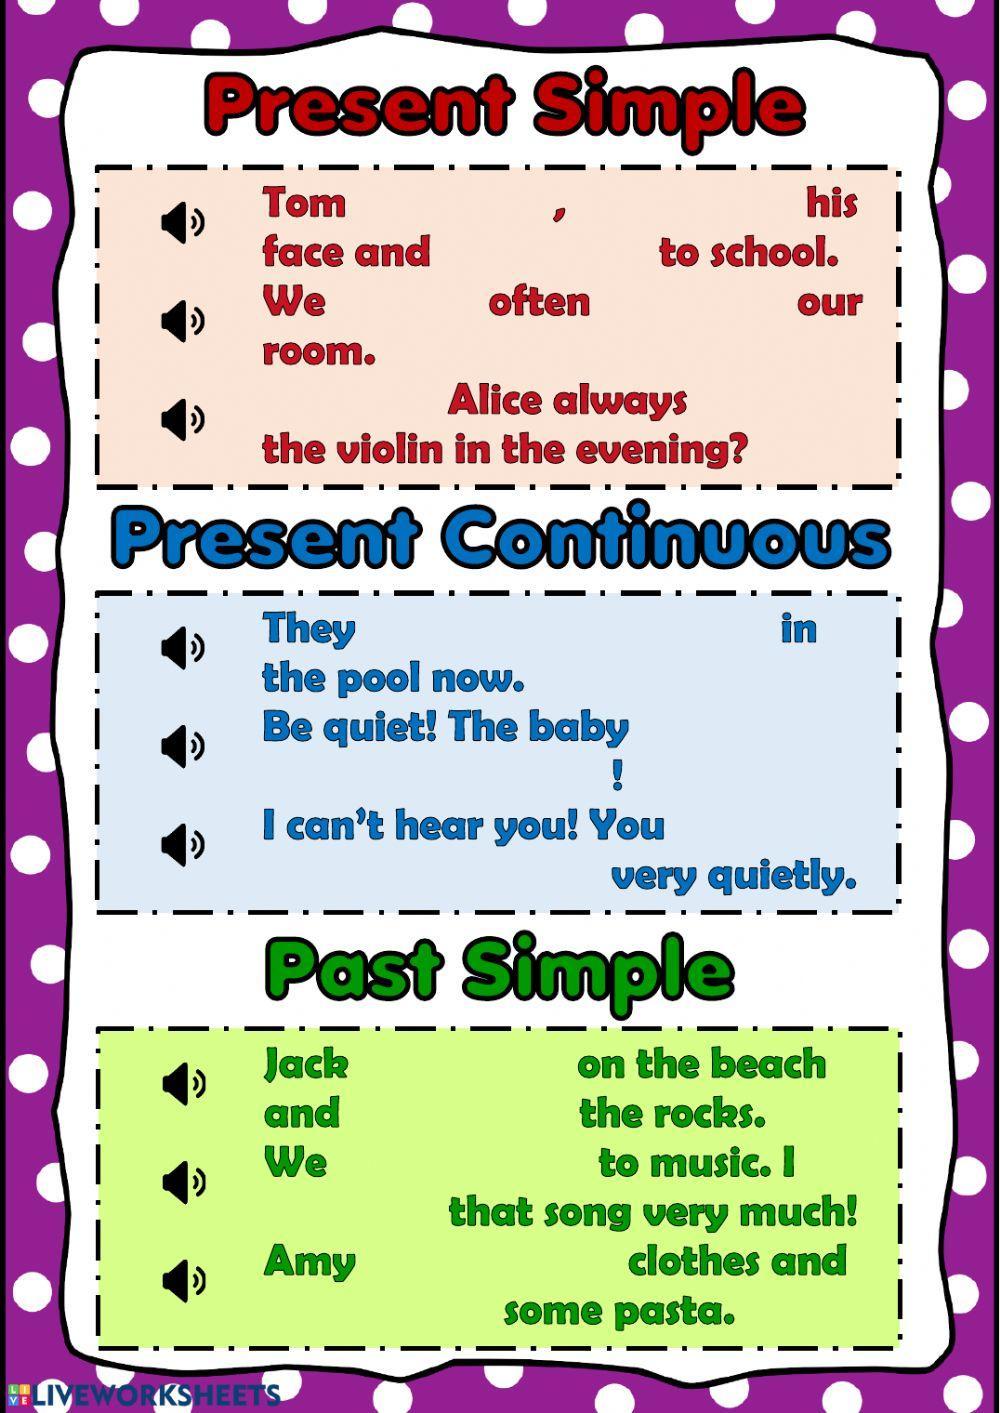 Present Simple, Continuous and Past Simple